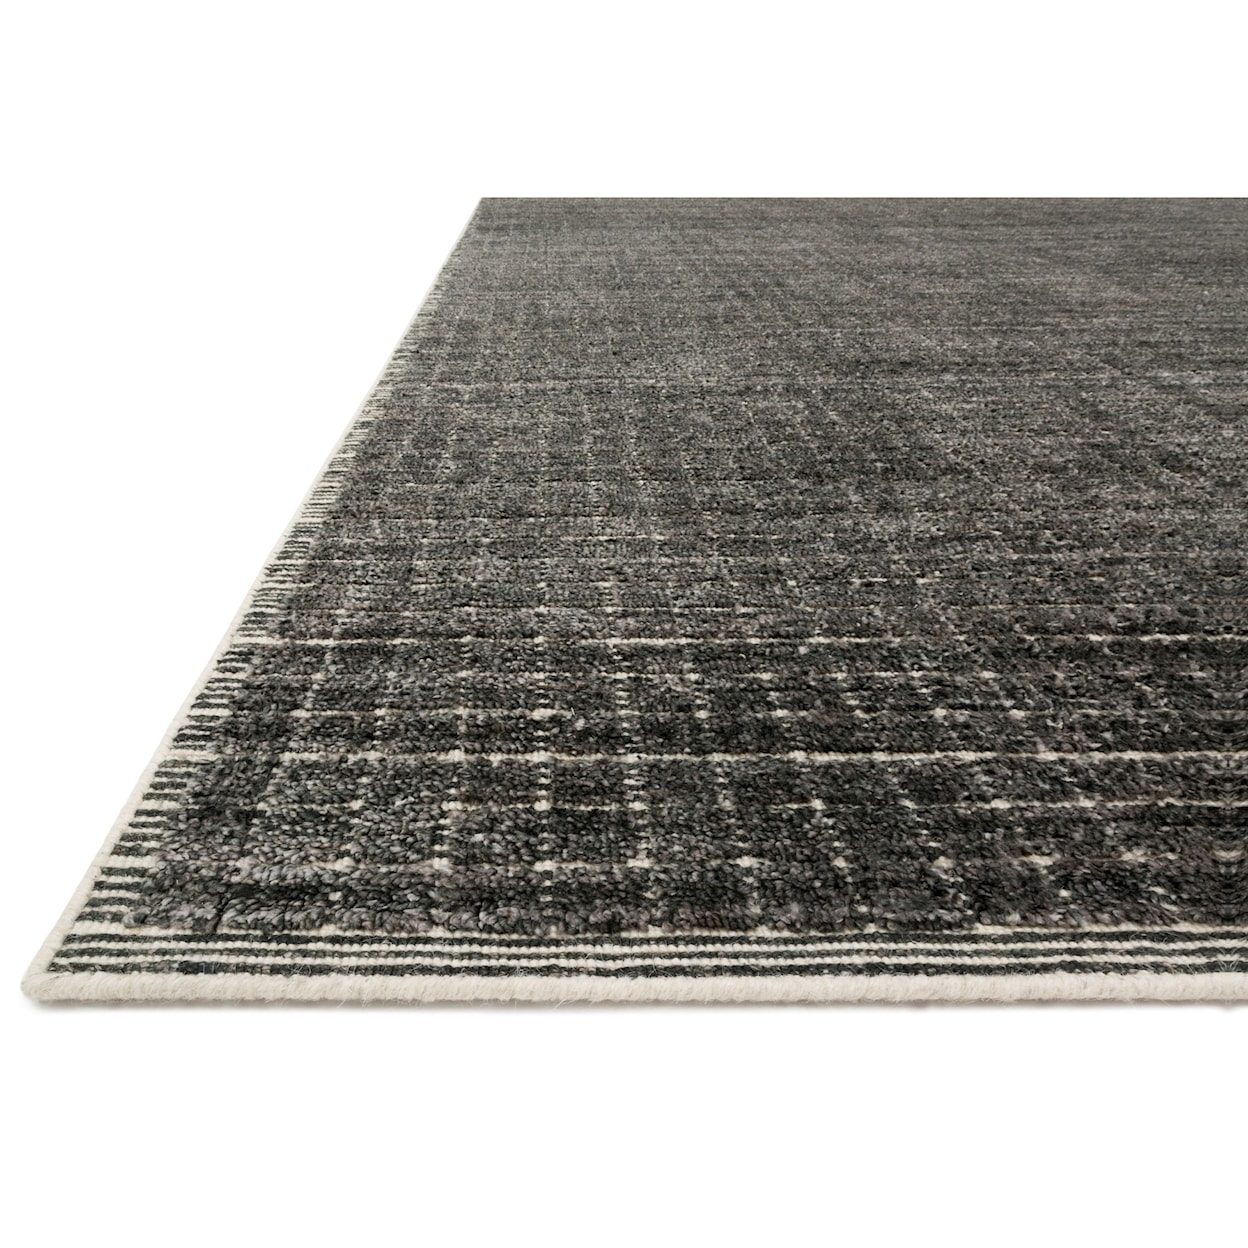 Reeds Rugs Beverly 2'6" x 9'9" Charcoal Rug